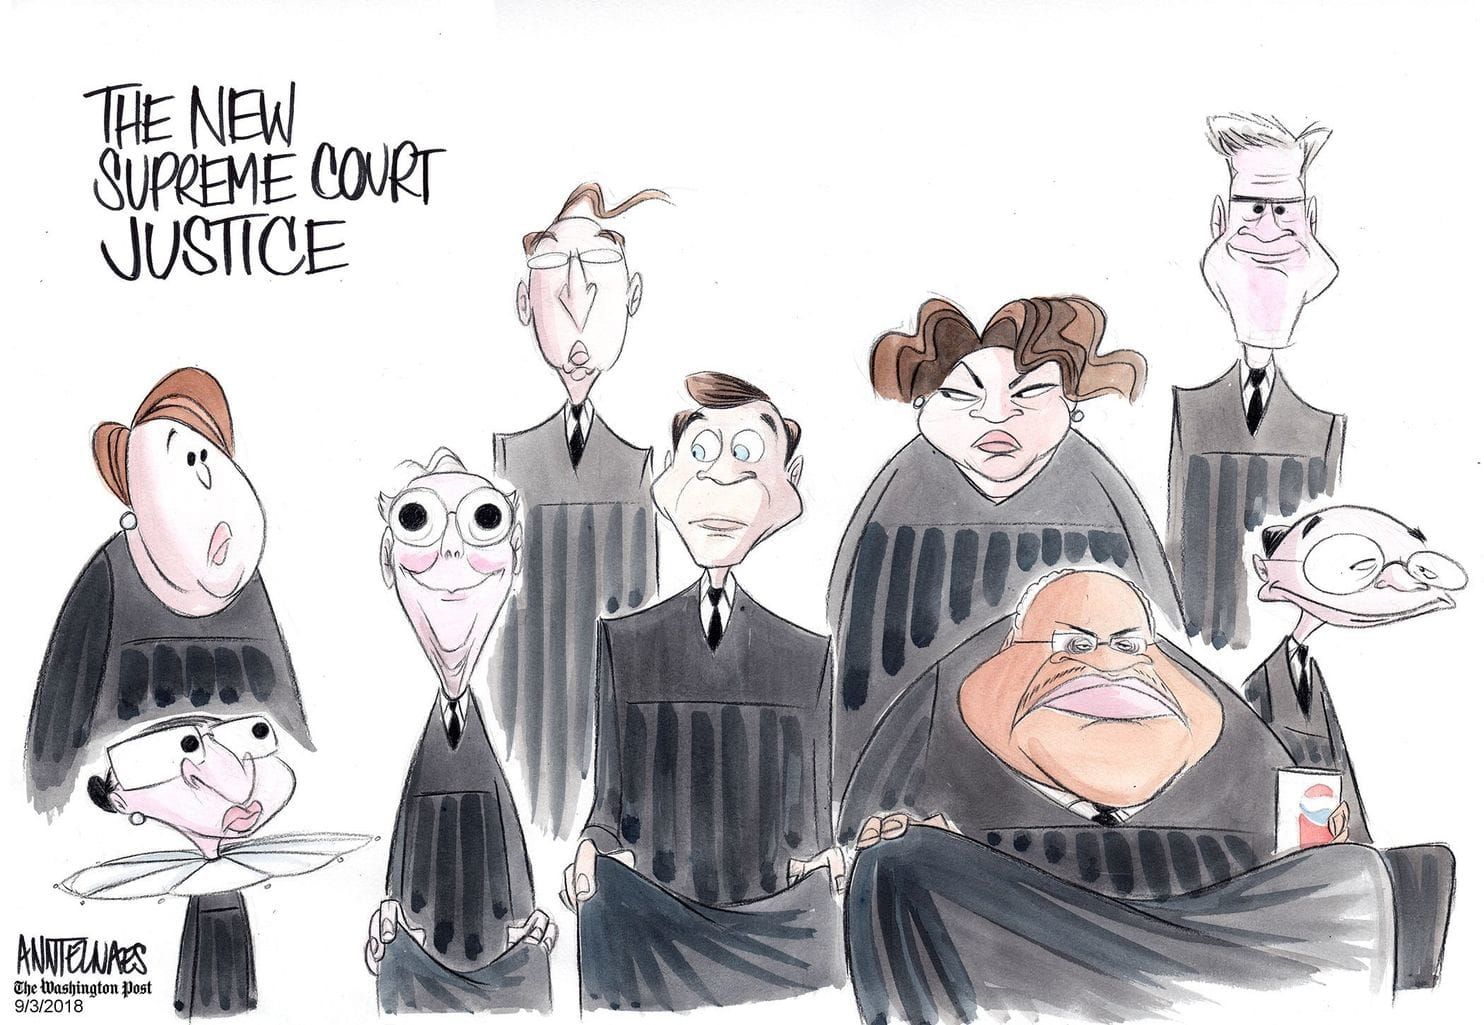 The new Supreme Court justice.